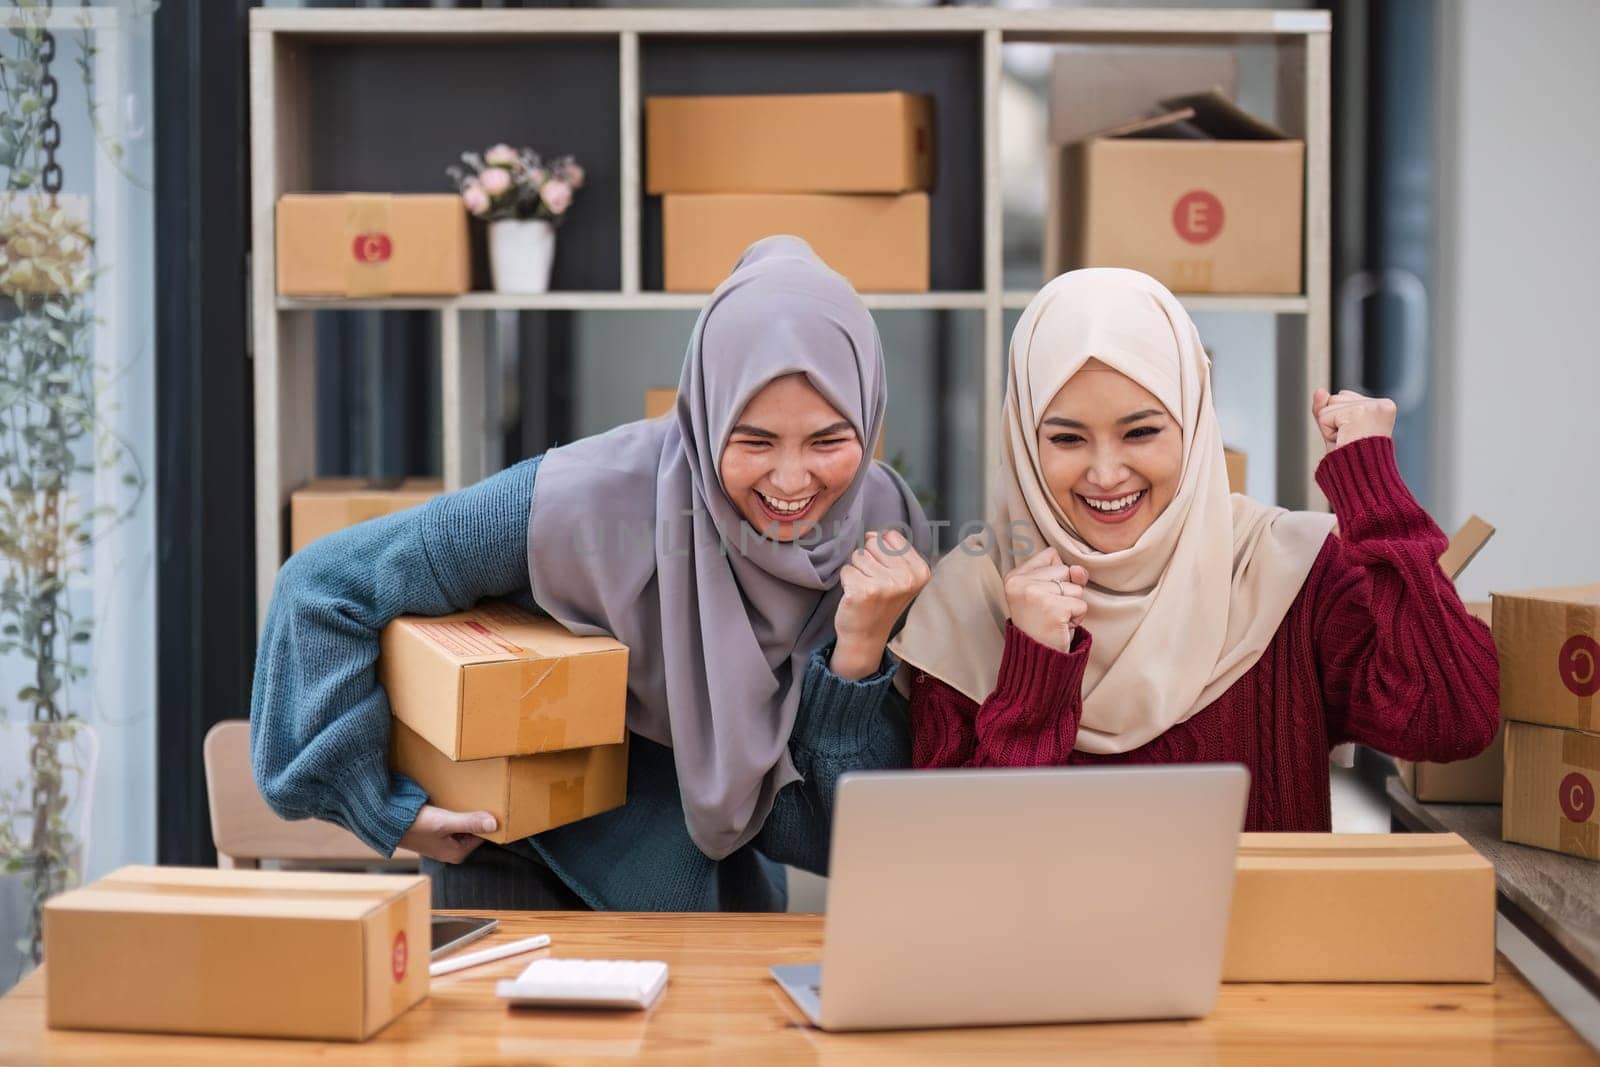 Two women muslim look at online product sales data on laptops and show joy..